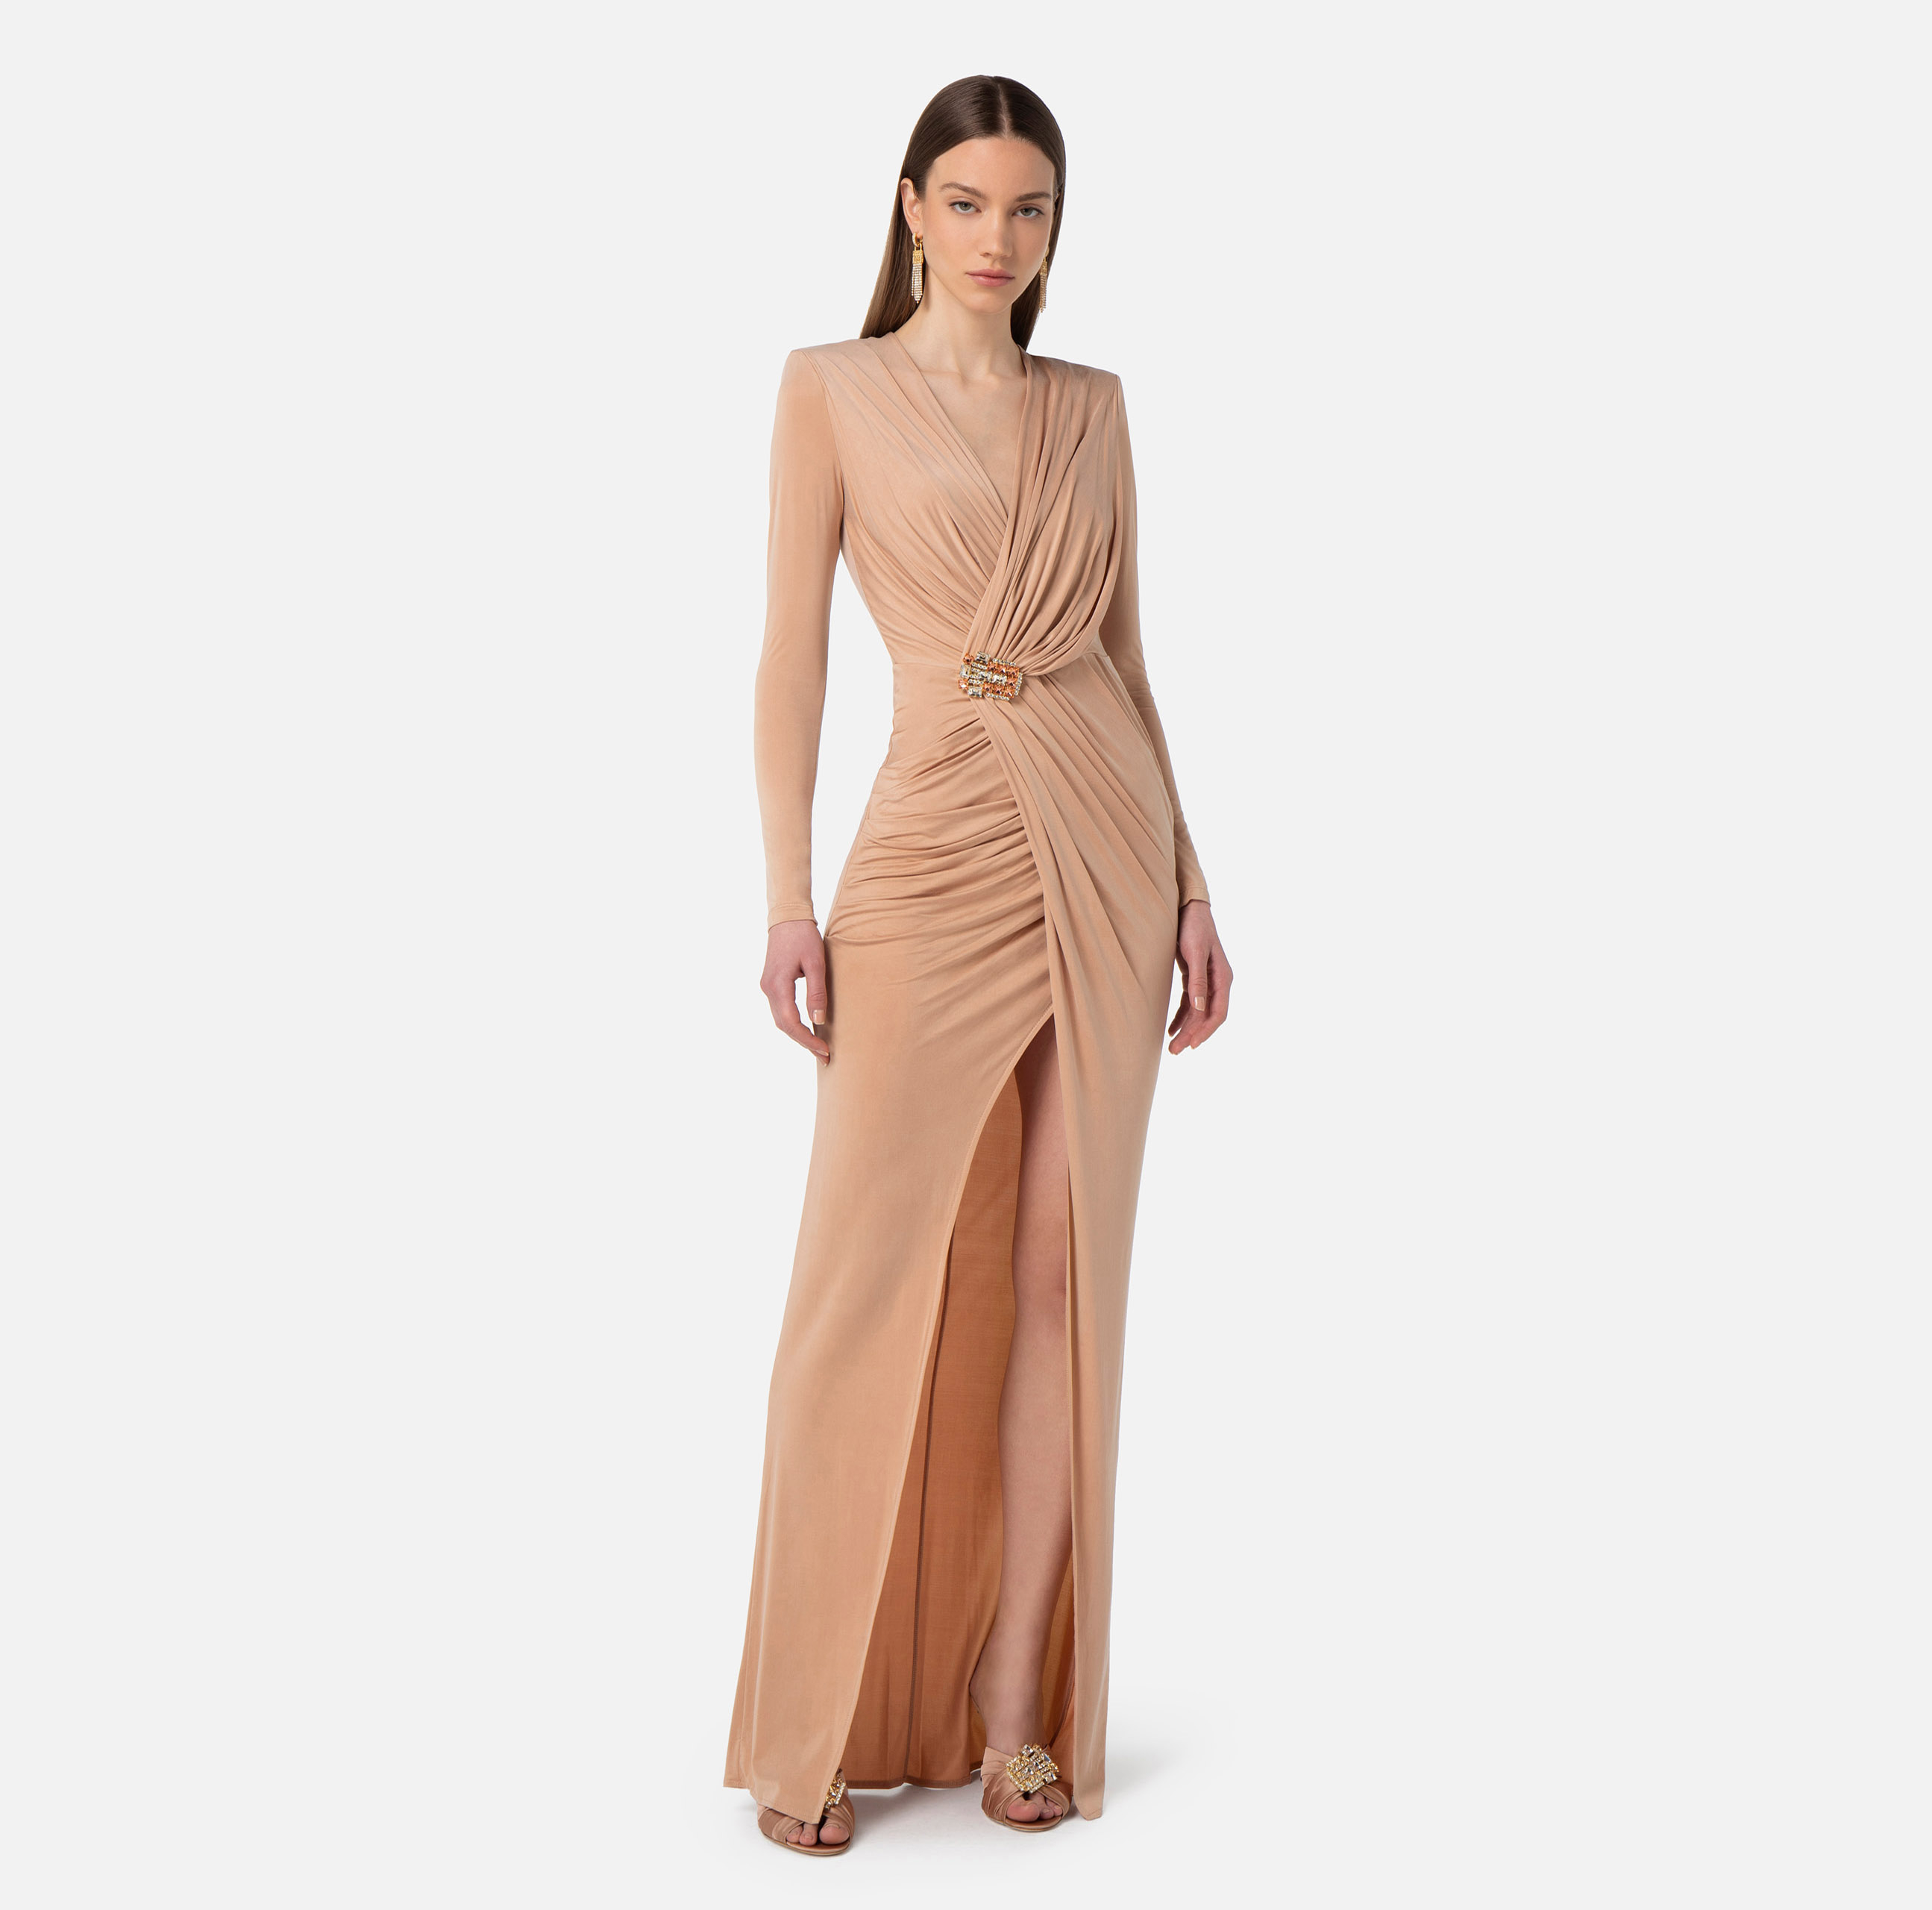 Red Carpet dress in cupro jersey with accessory - Elisabetta Franchi